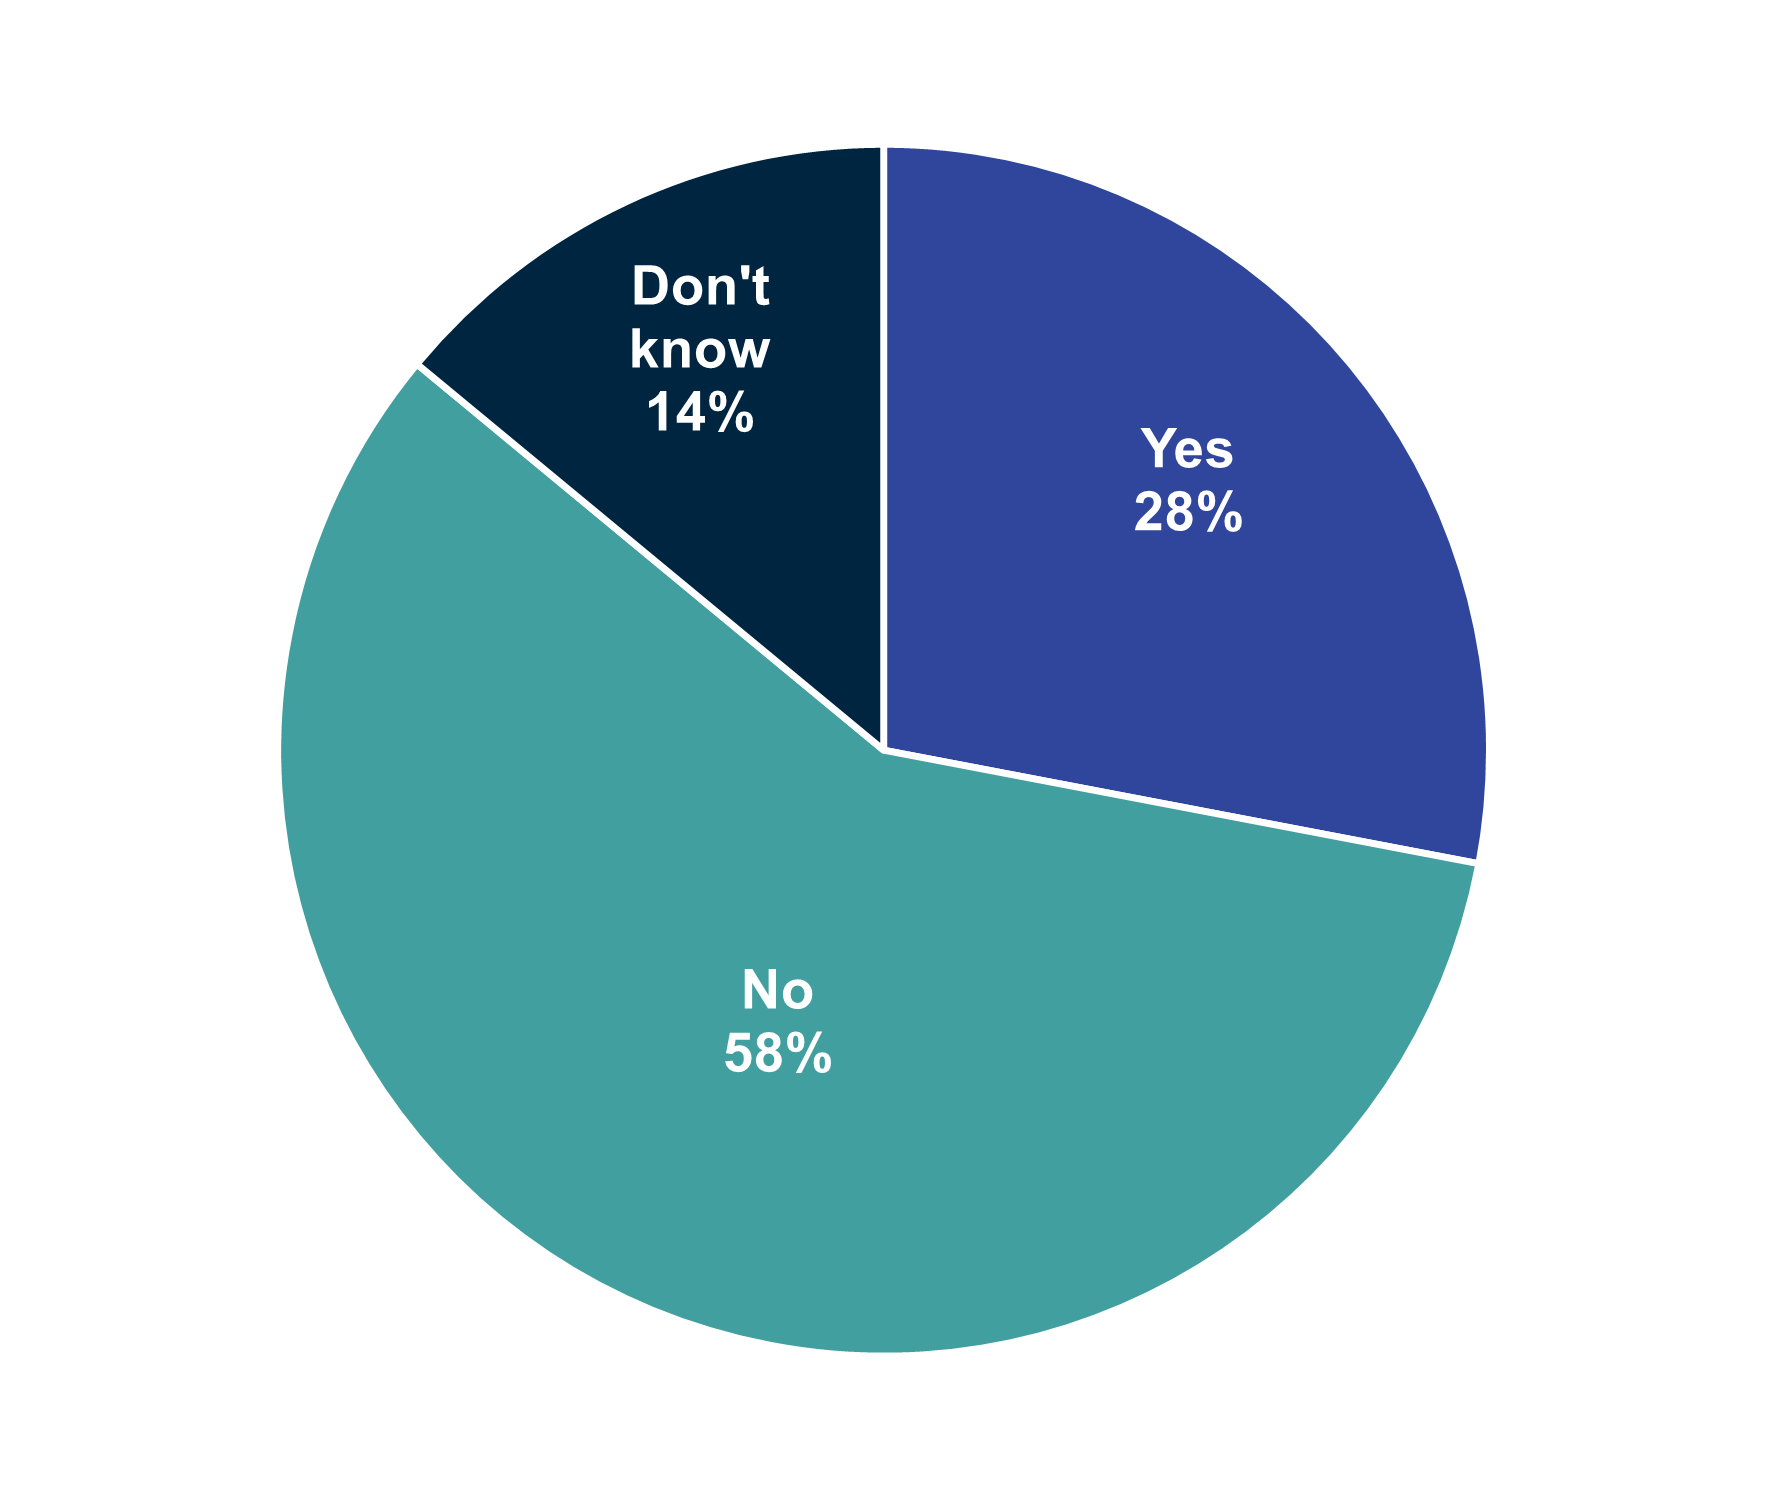 A pie chart showing the experience of ever seeing family members gambling. Data from the chart is provided within the following table.